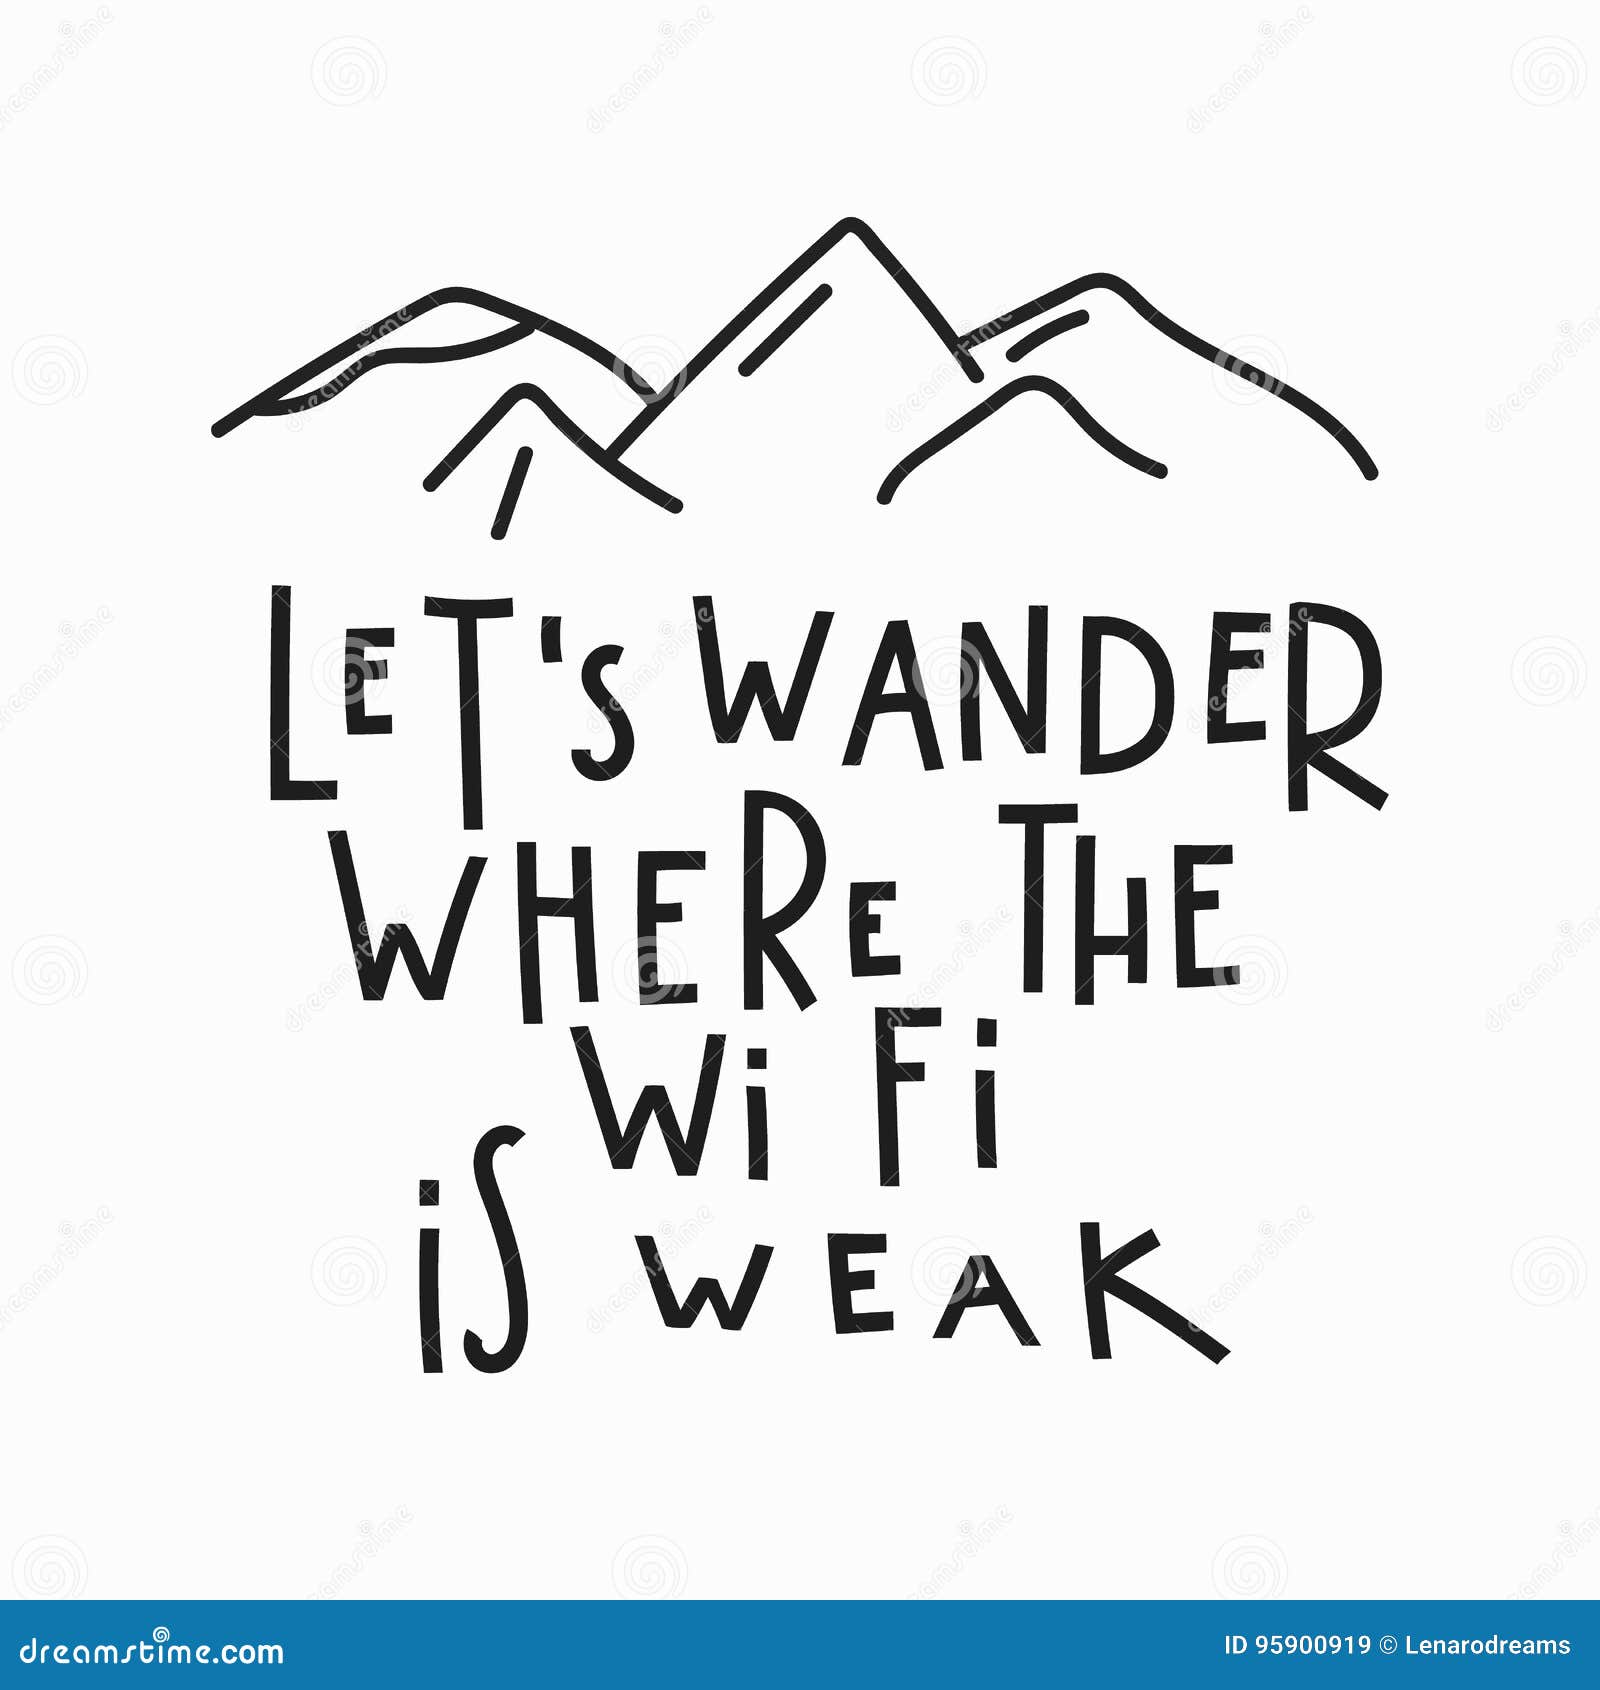 wander wi fi weak quote typography lettering